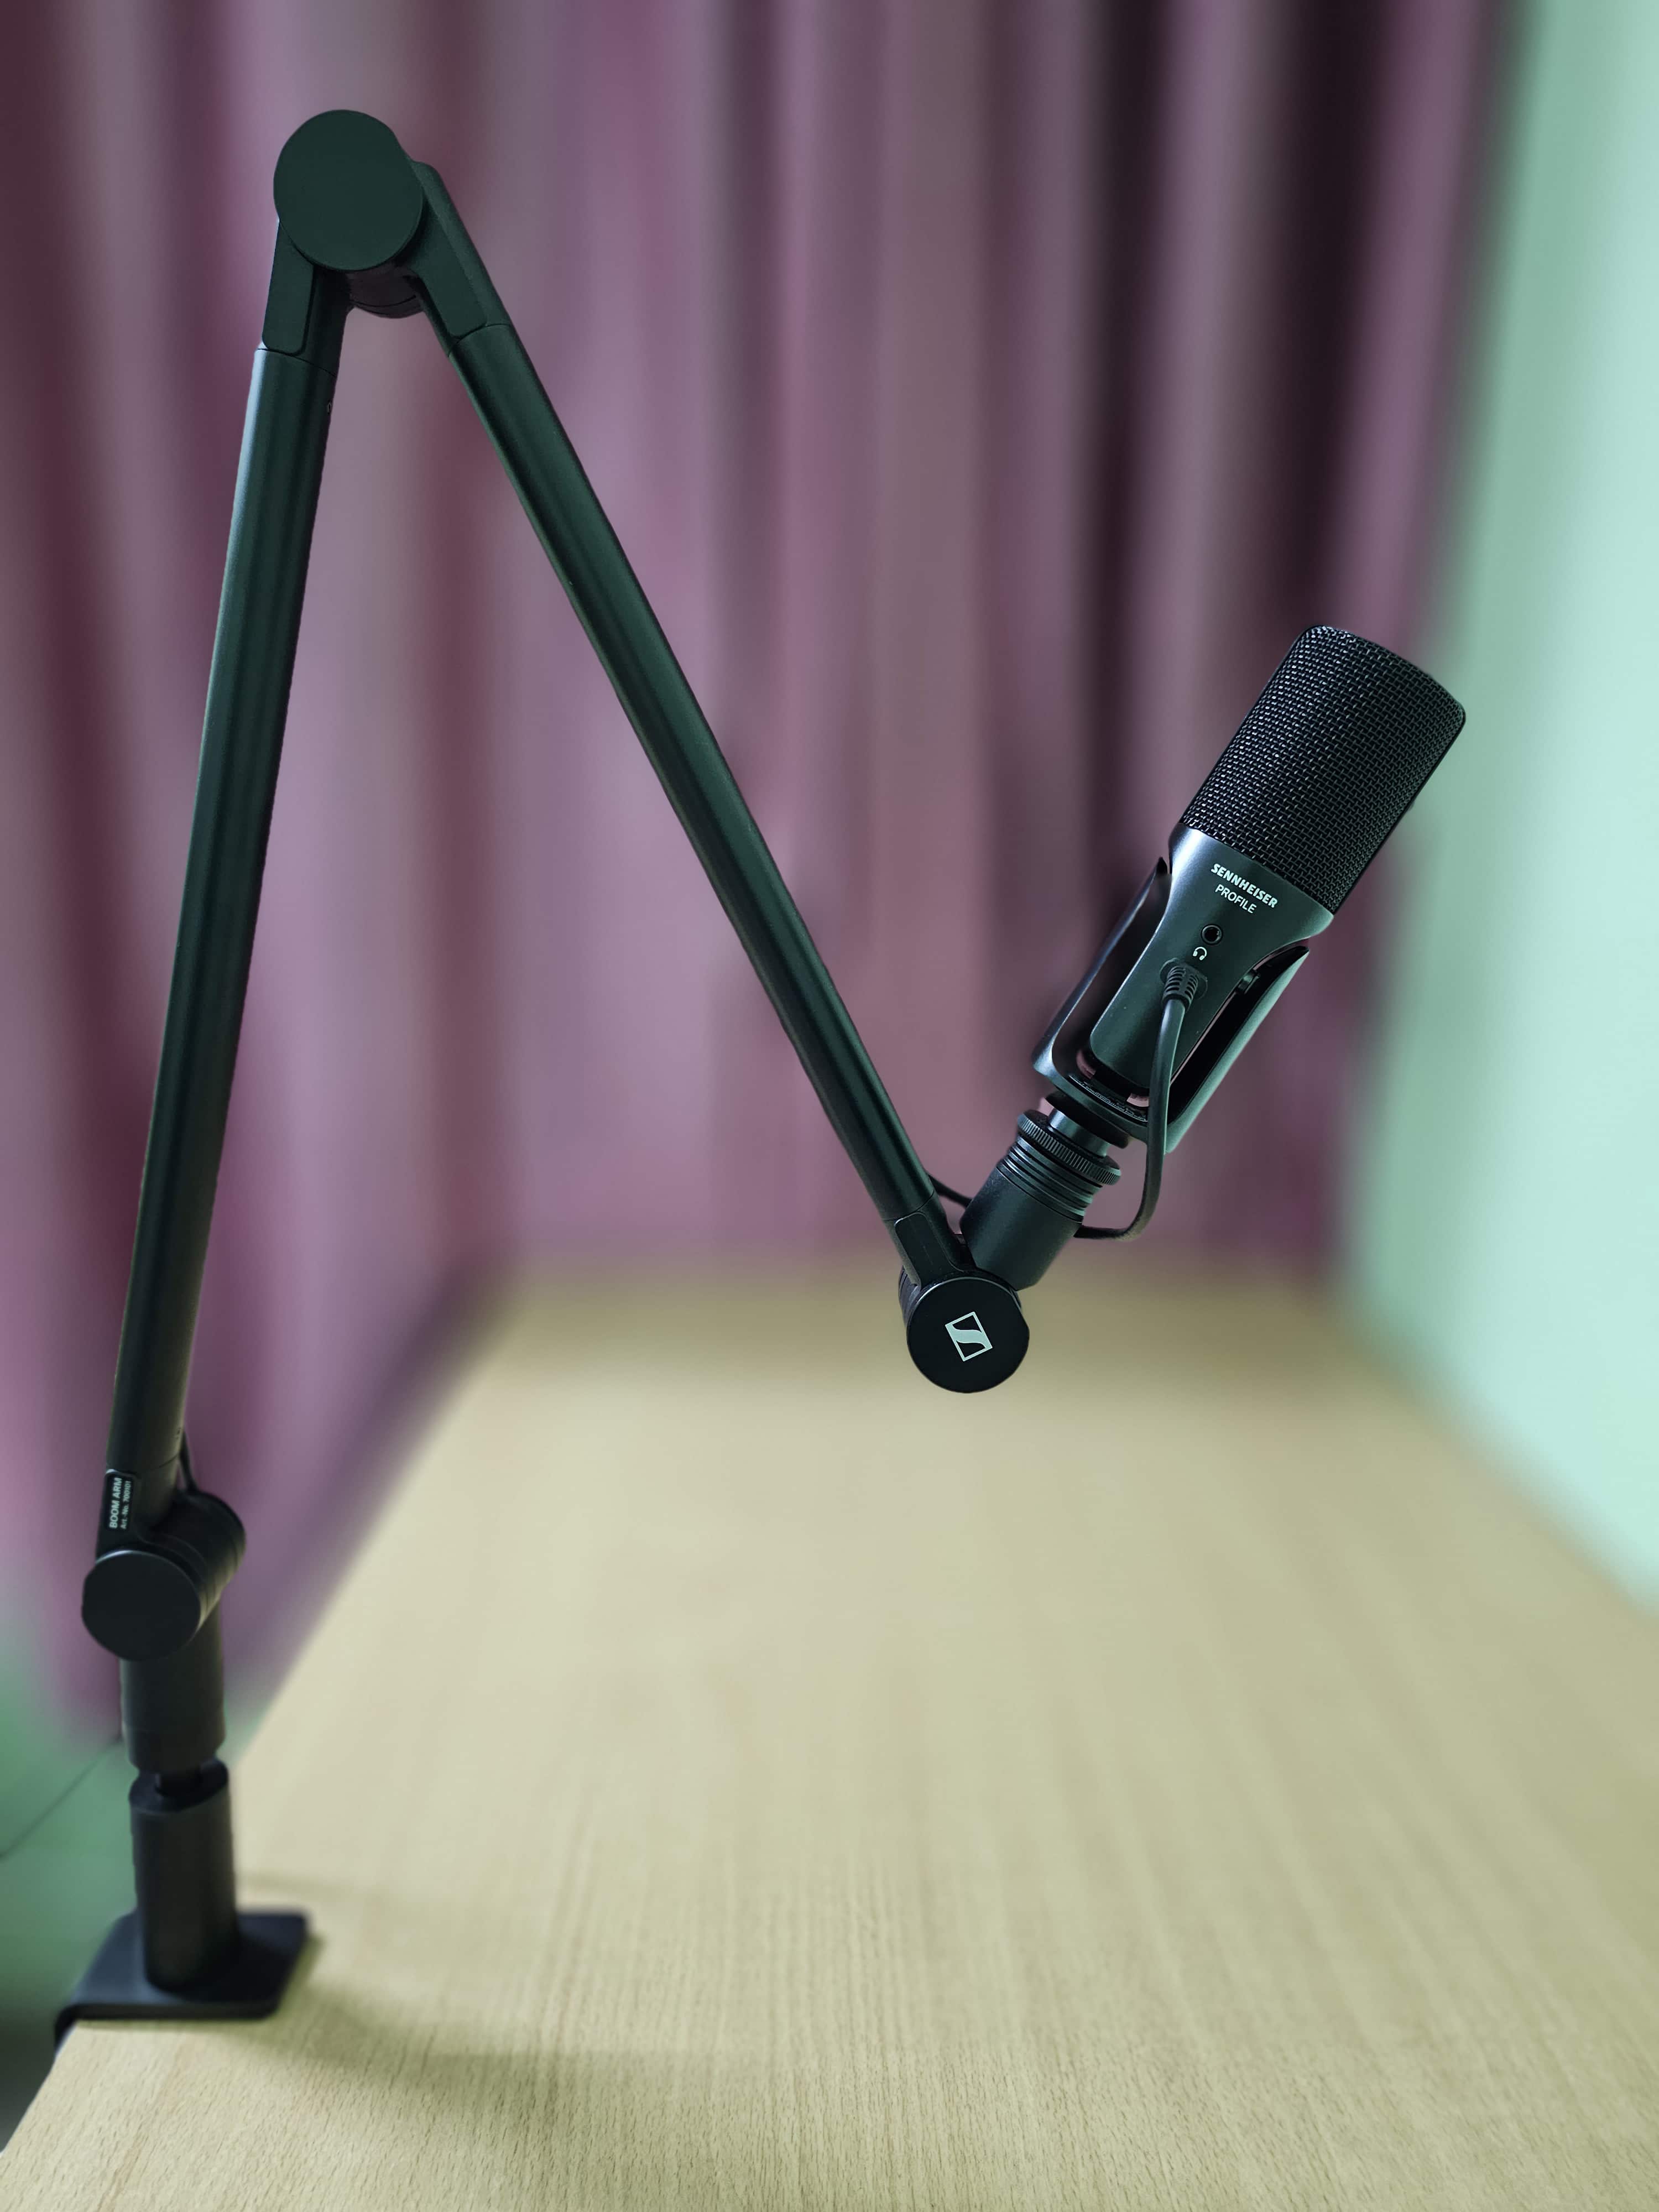 PRO Sound for Cheap! Sennheiser Profile Microphone REVIEW 